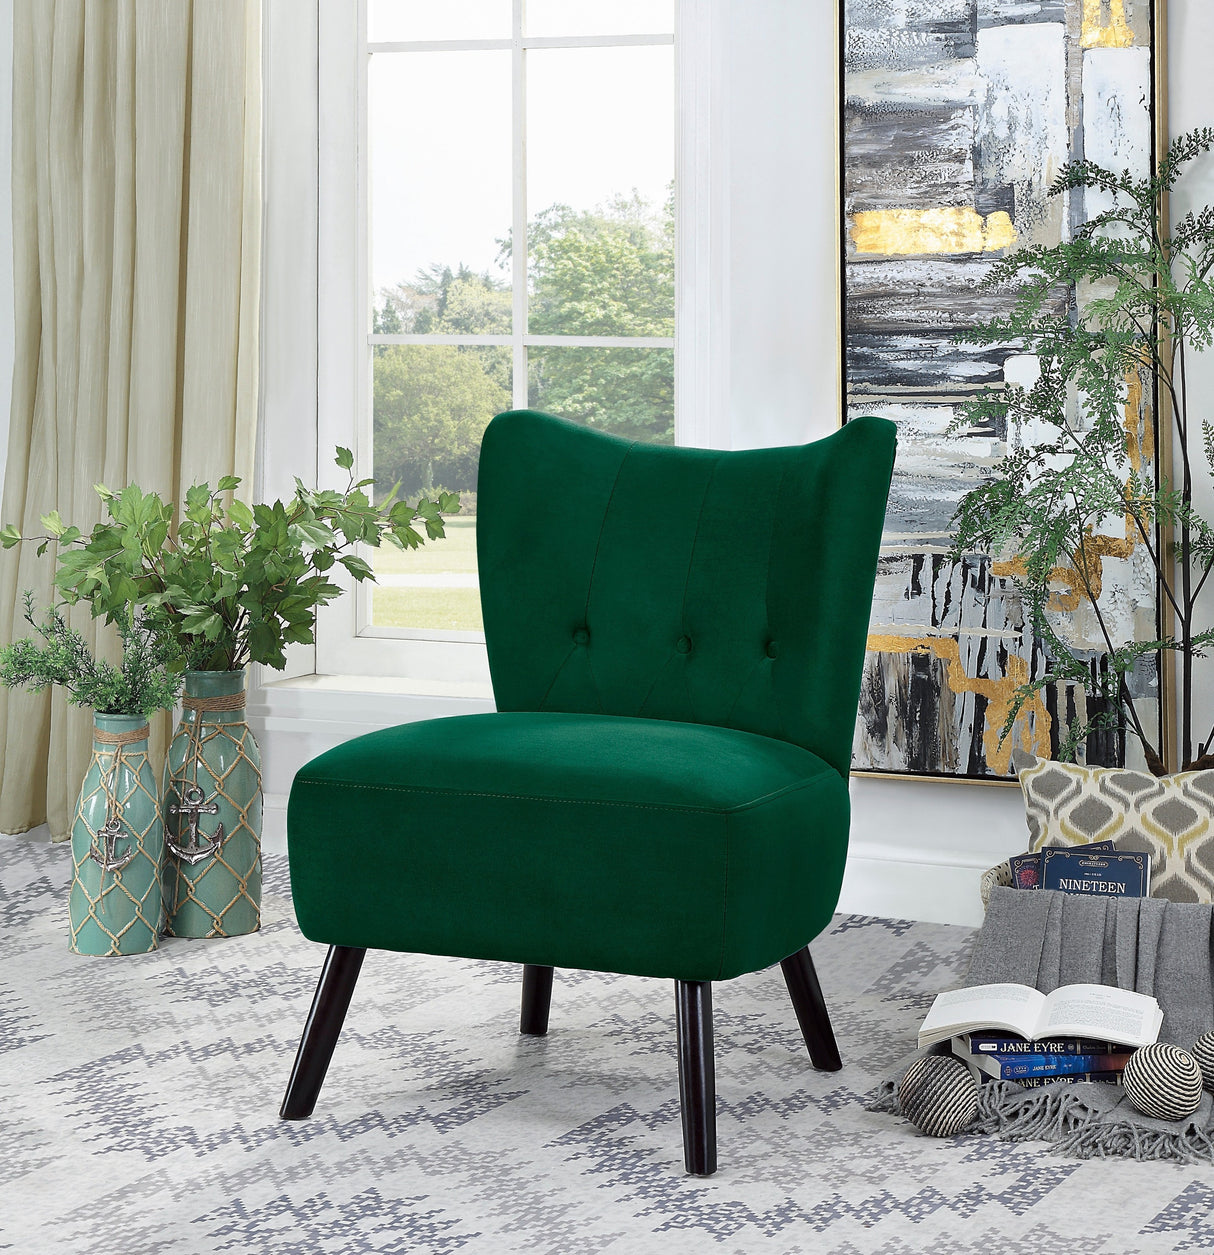 Unique Style Green Velvet Covering Accent Chair Button-Tufted Back Brown Finish Wood Legs Modern Home Furniture - Home Elegance USA